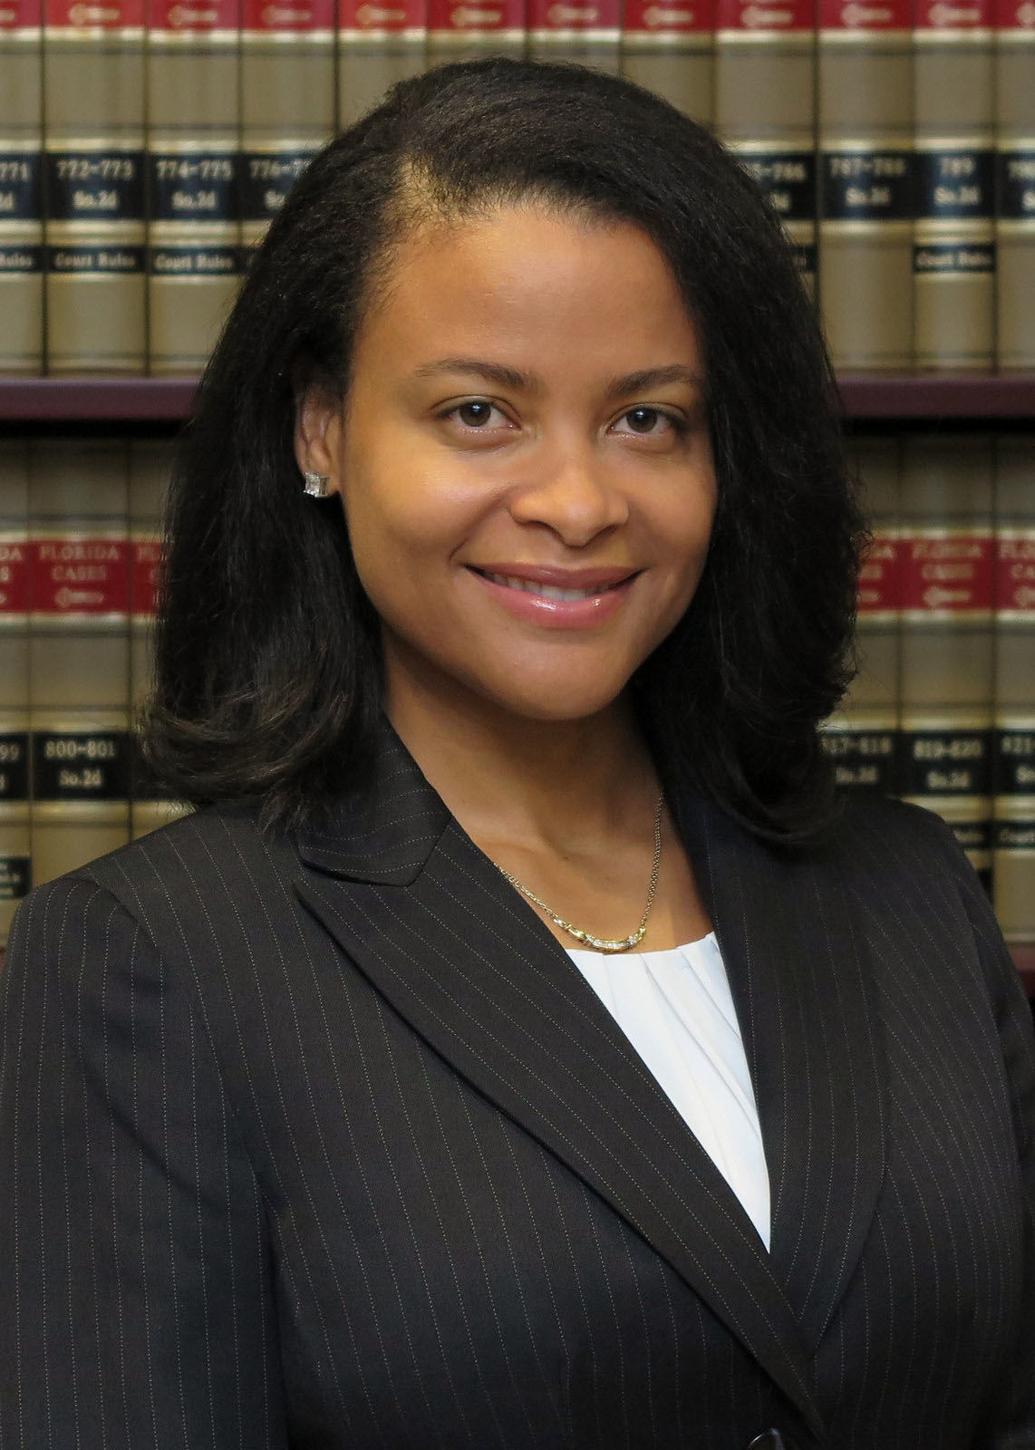 Jamaican born judge elevated to Miami Dade Circuit Court South